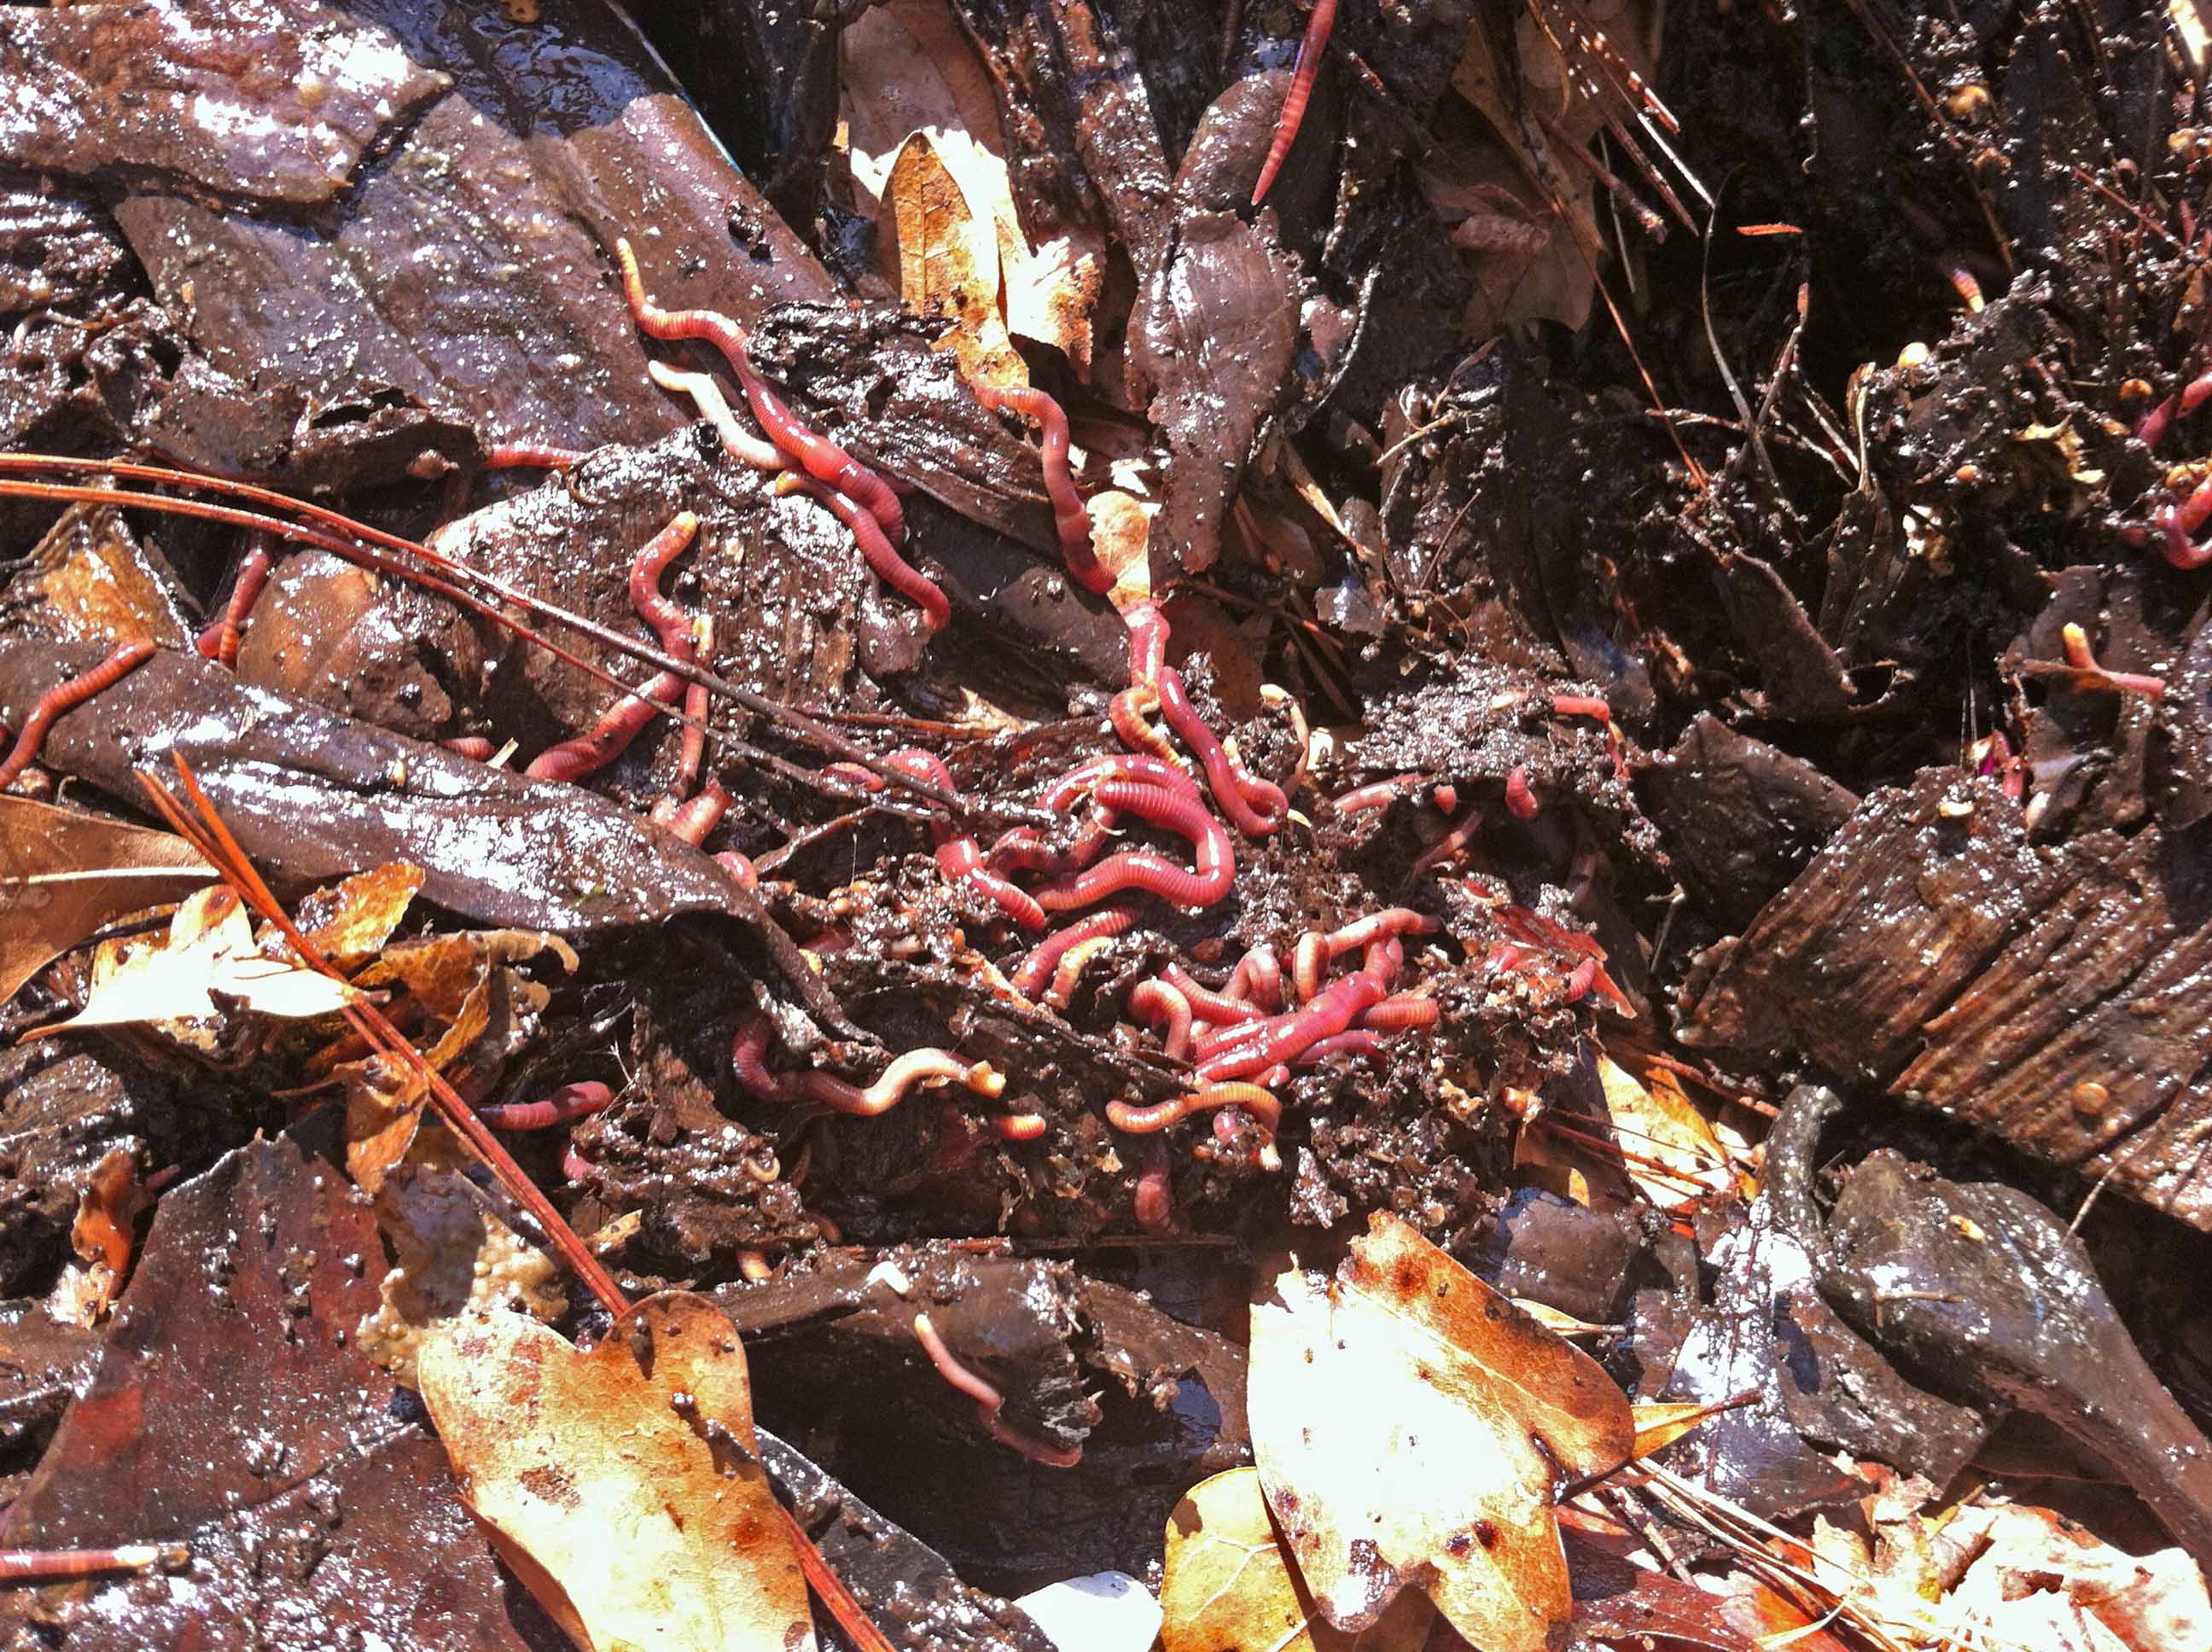 Earthworms in a healthy compost bin in middle Georgia.